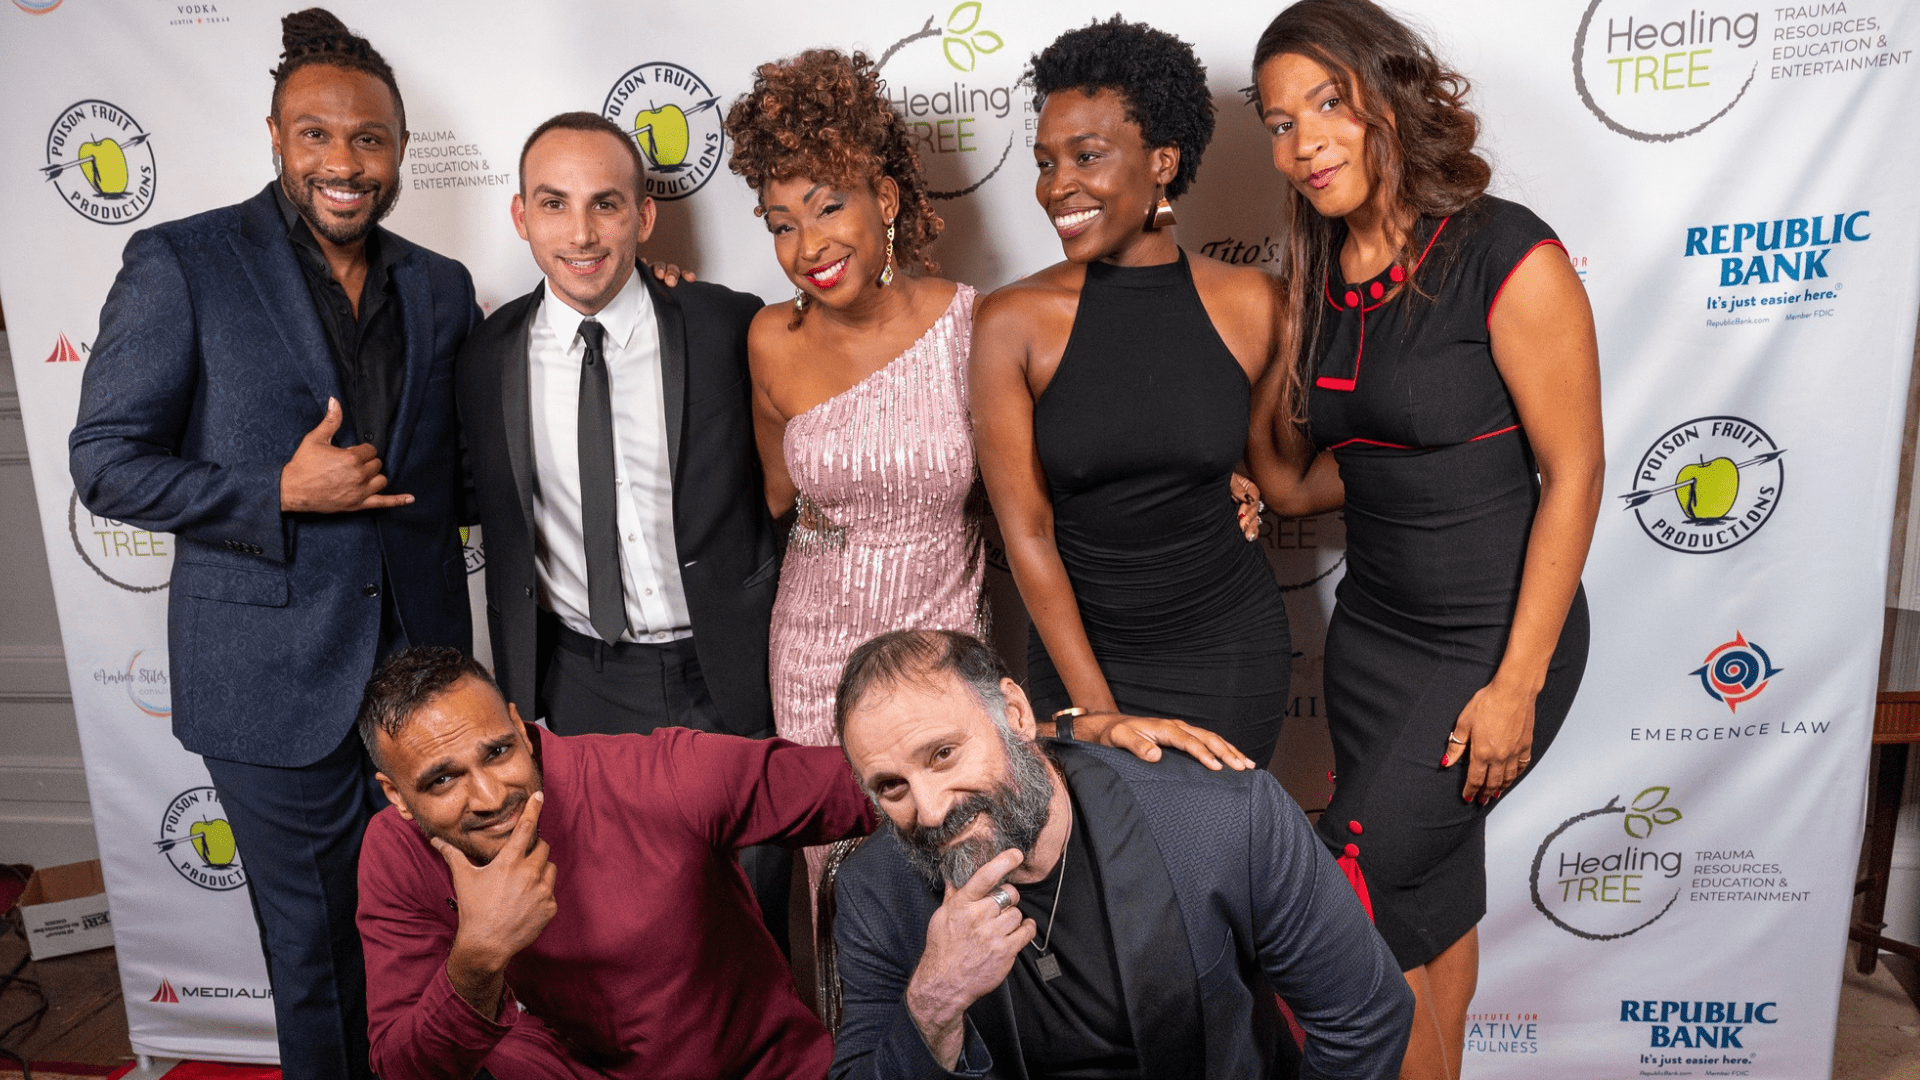 Healing TREE Gala 2023 Live in NYC: A Night of Inspiration, Healing and Entertainment